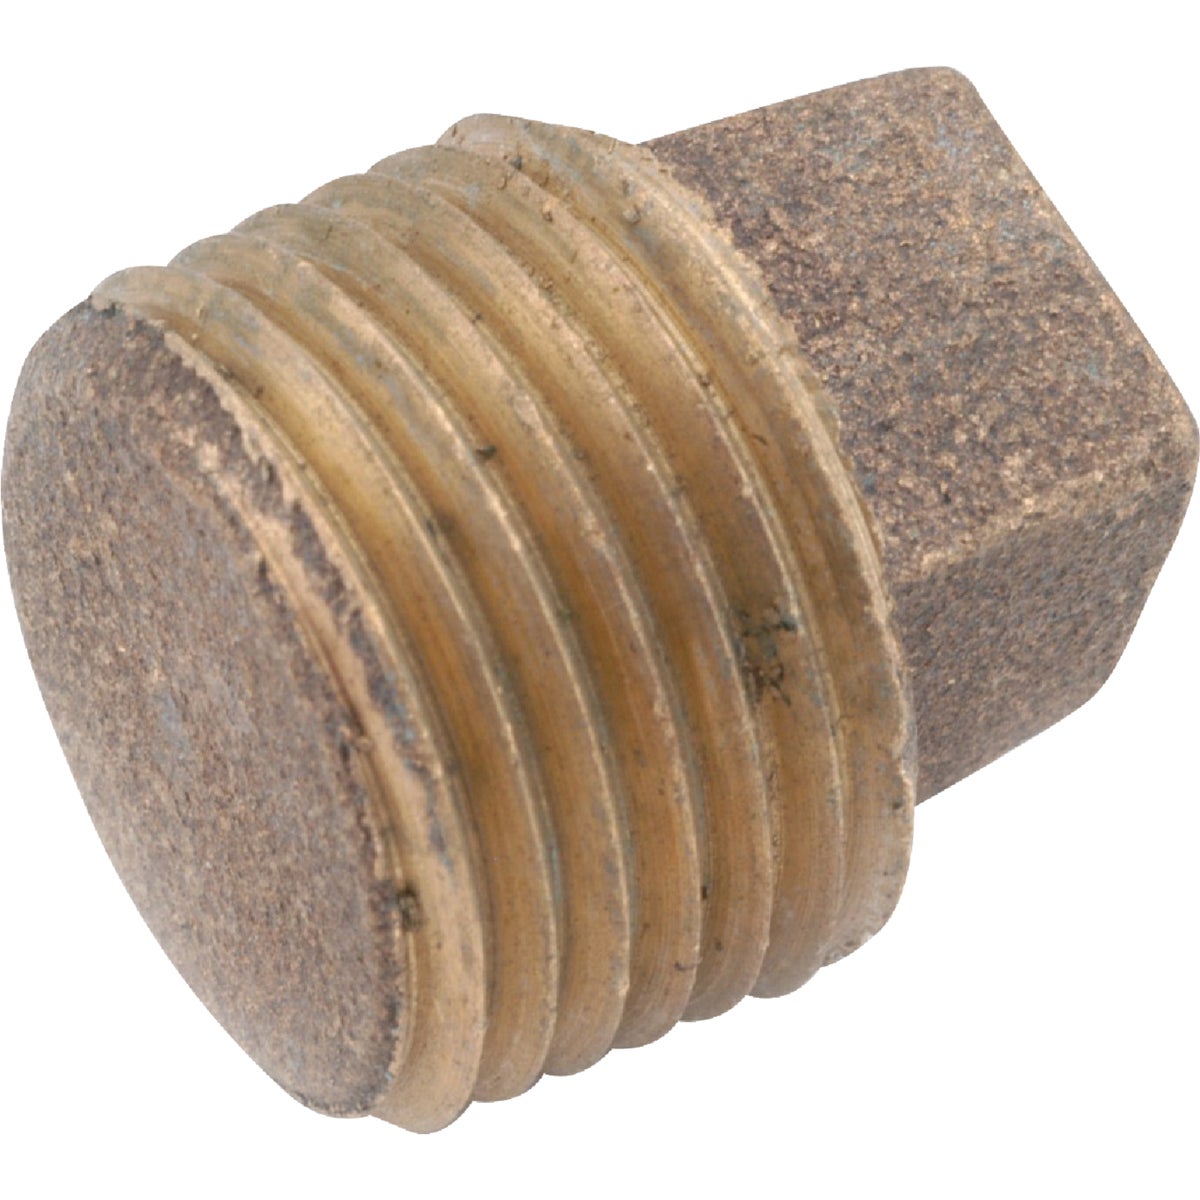 Item 464054, Low lead solid threaded pipe plug. Rough brass, import.